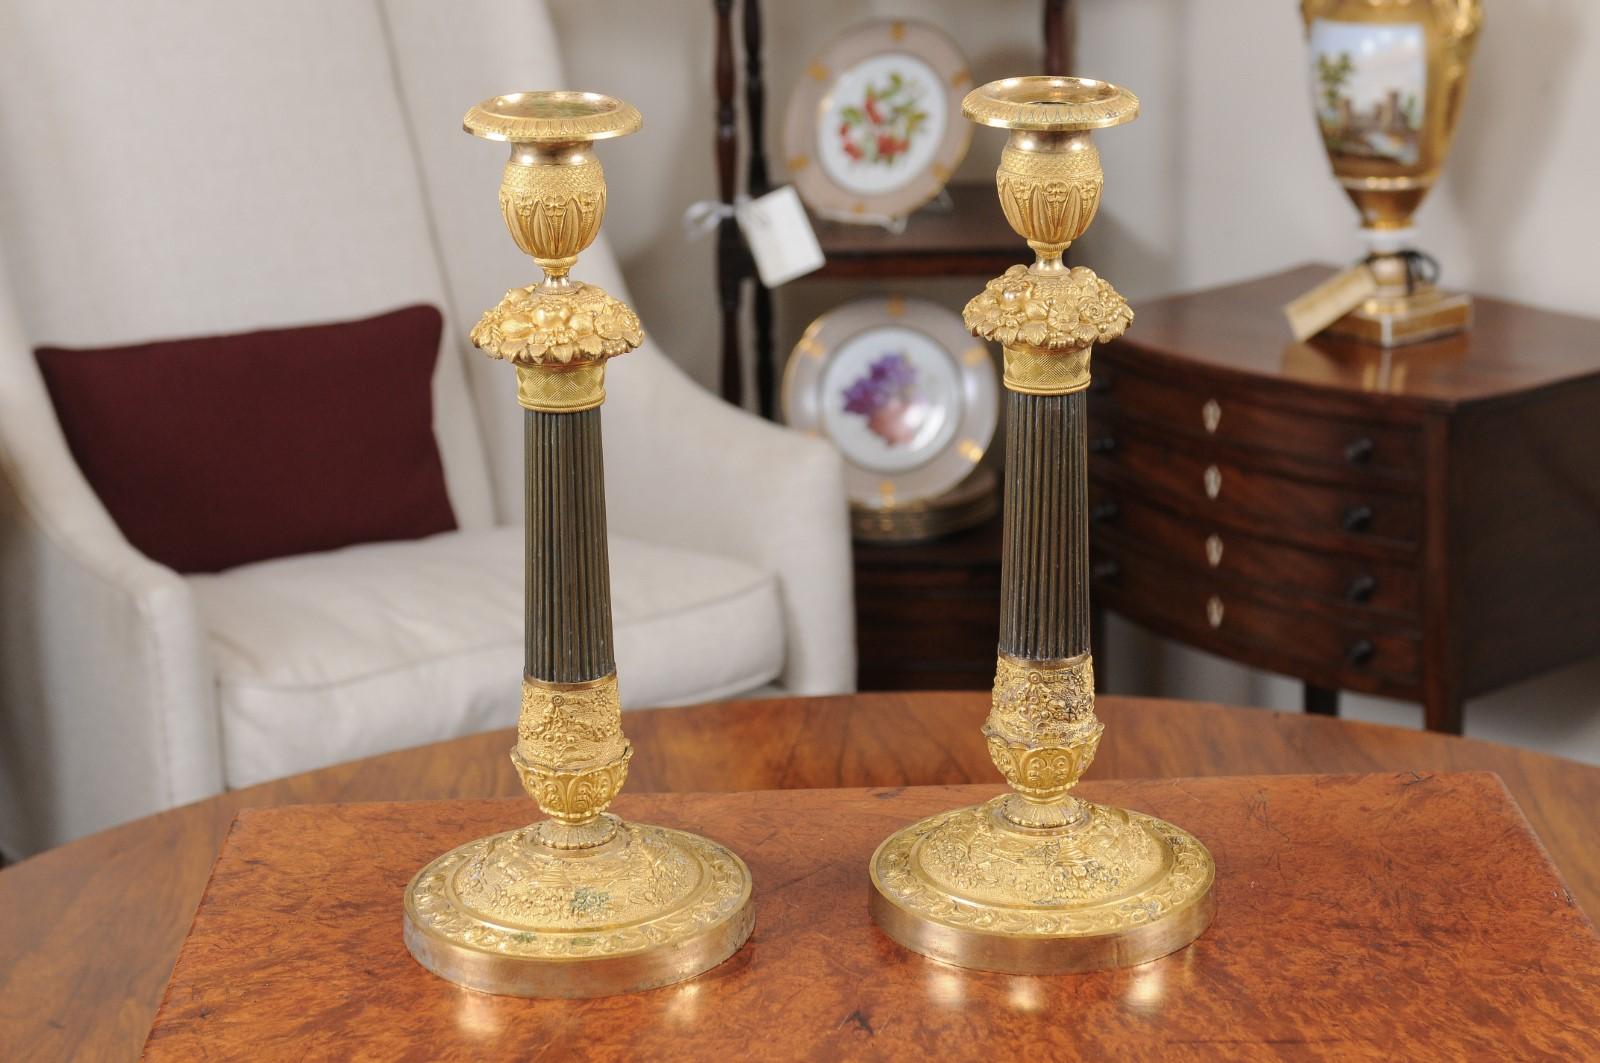 Pair of Bronze Dore Candlesticks with Foliage Design, Early 19th Century France For Sale 3